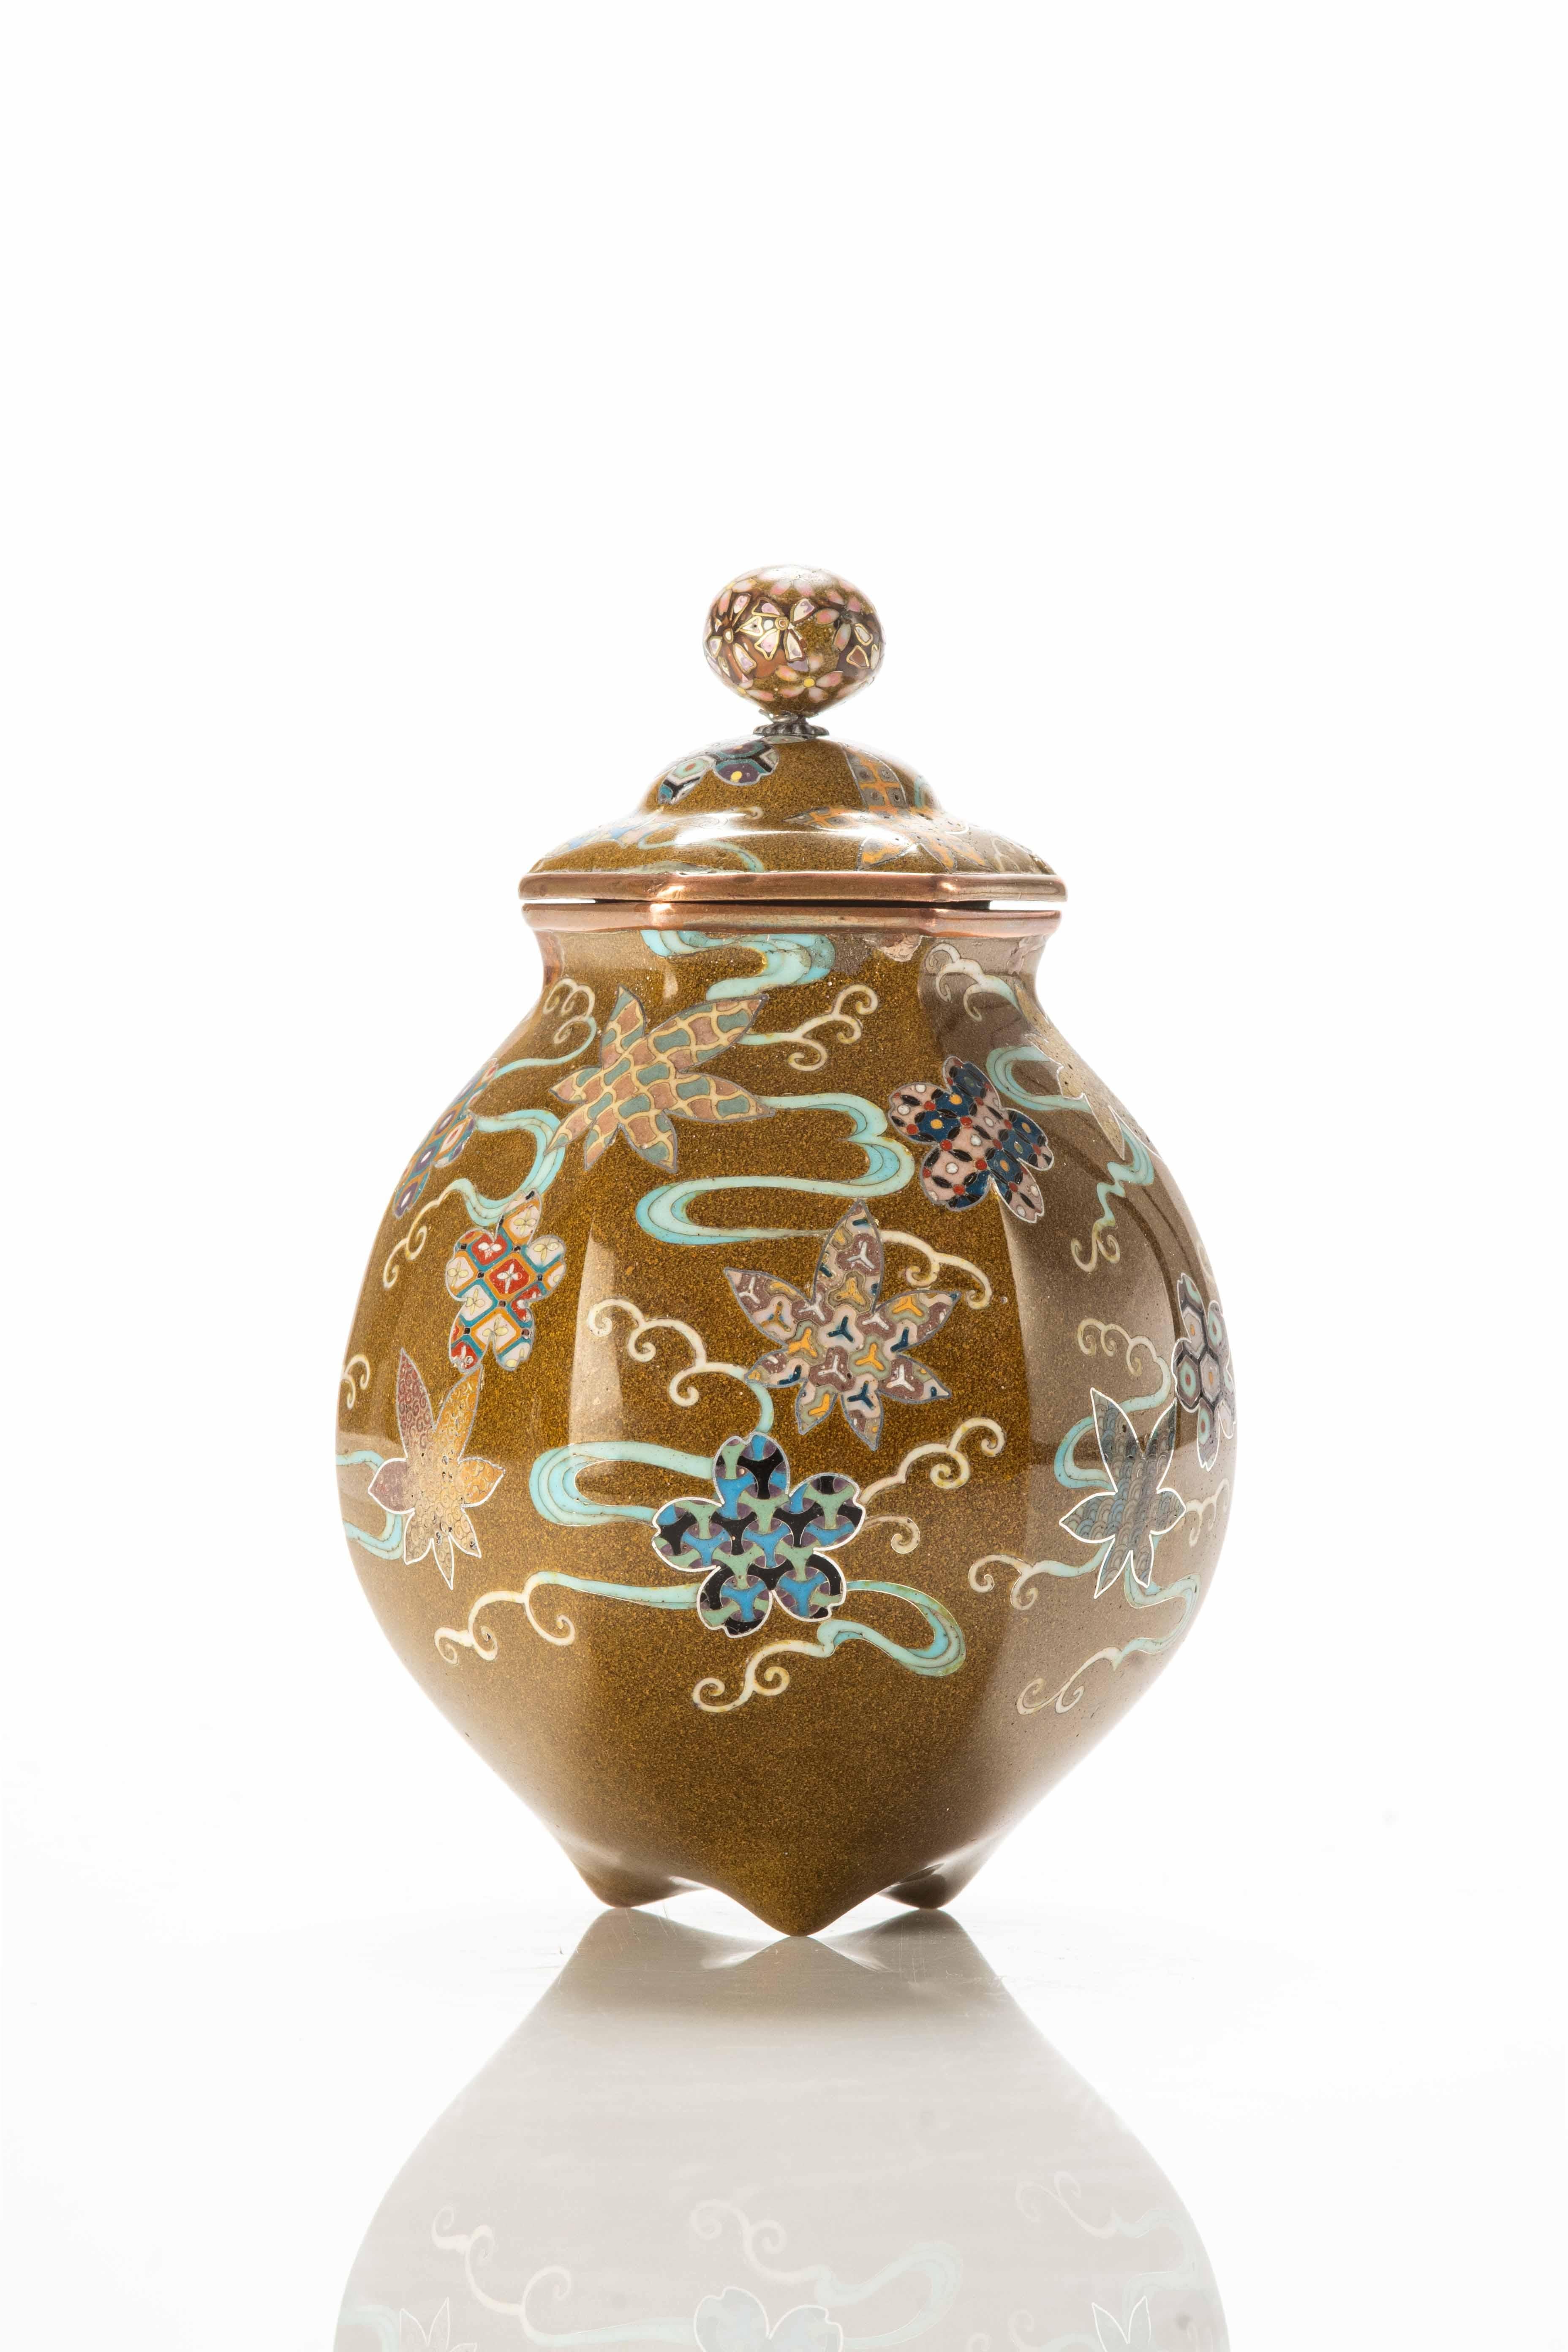 Cloisonné potiche with a hexagonal shape, embellished with delicate floral decorations on reserves held by silver threads with geometric motifs. The lid features a spherical socket.

Origin: Japan

Period: Meiji end of 19th century.      